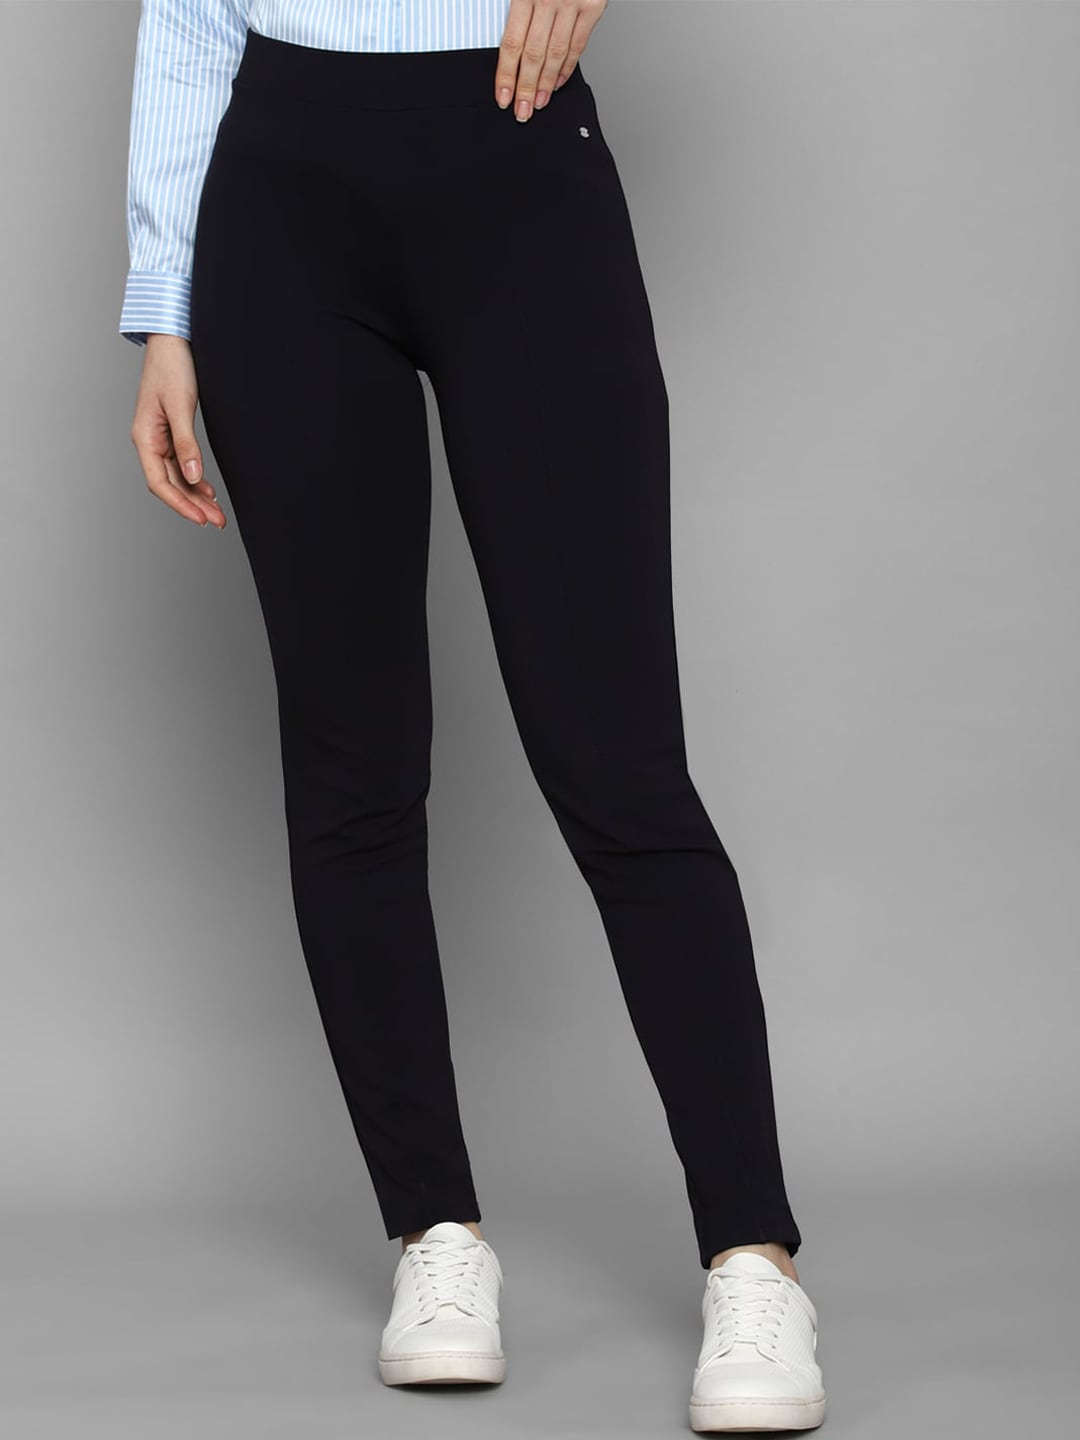 Allen Solly Woman Black Trousers Price in India